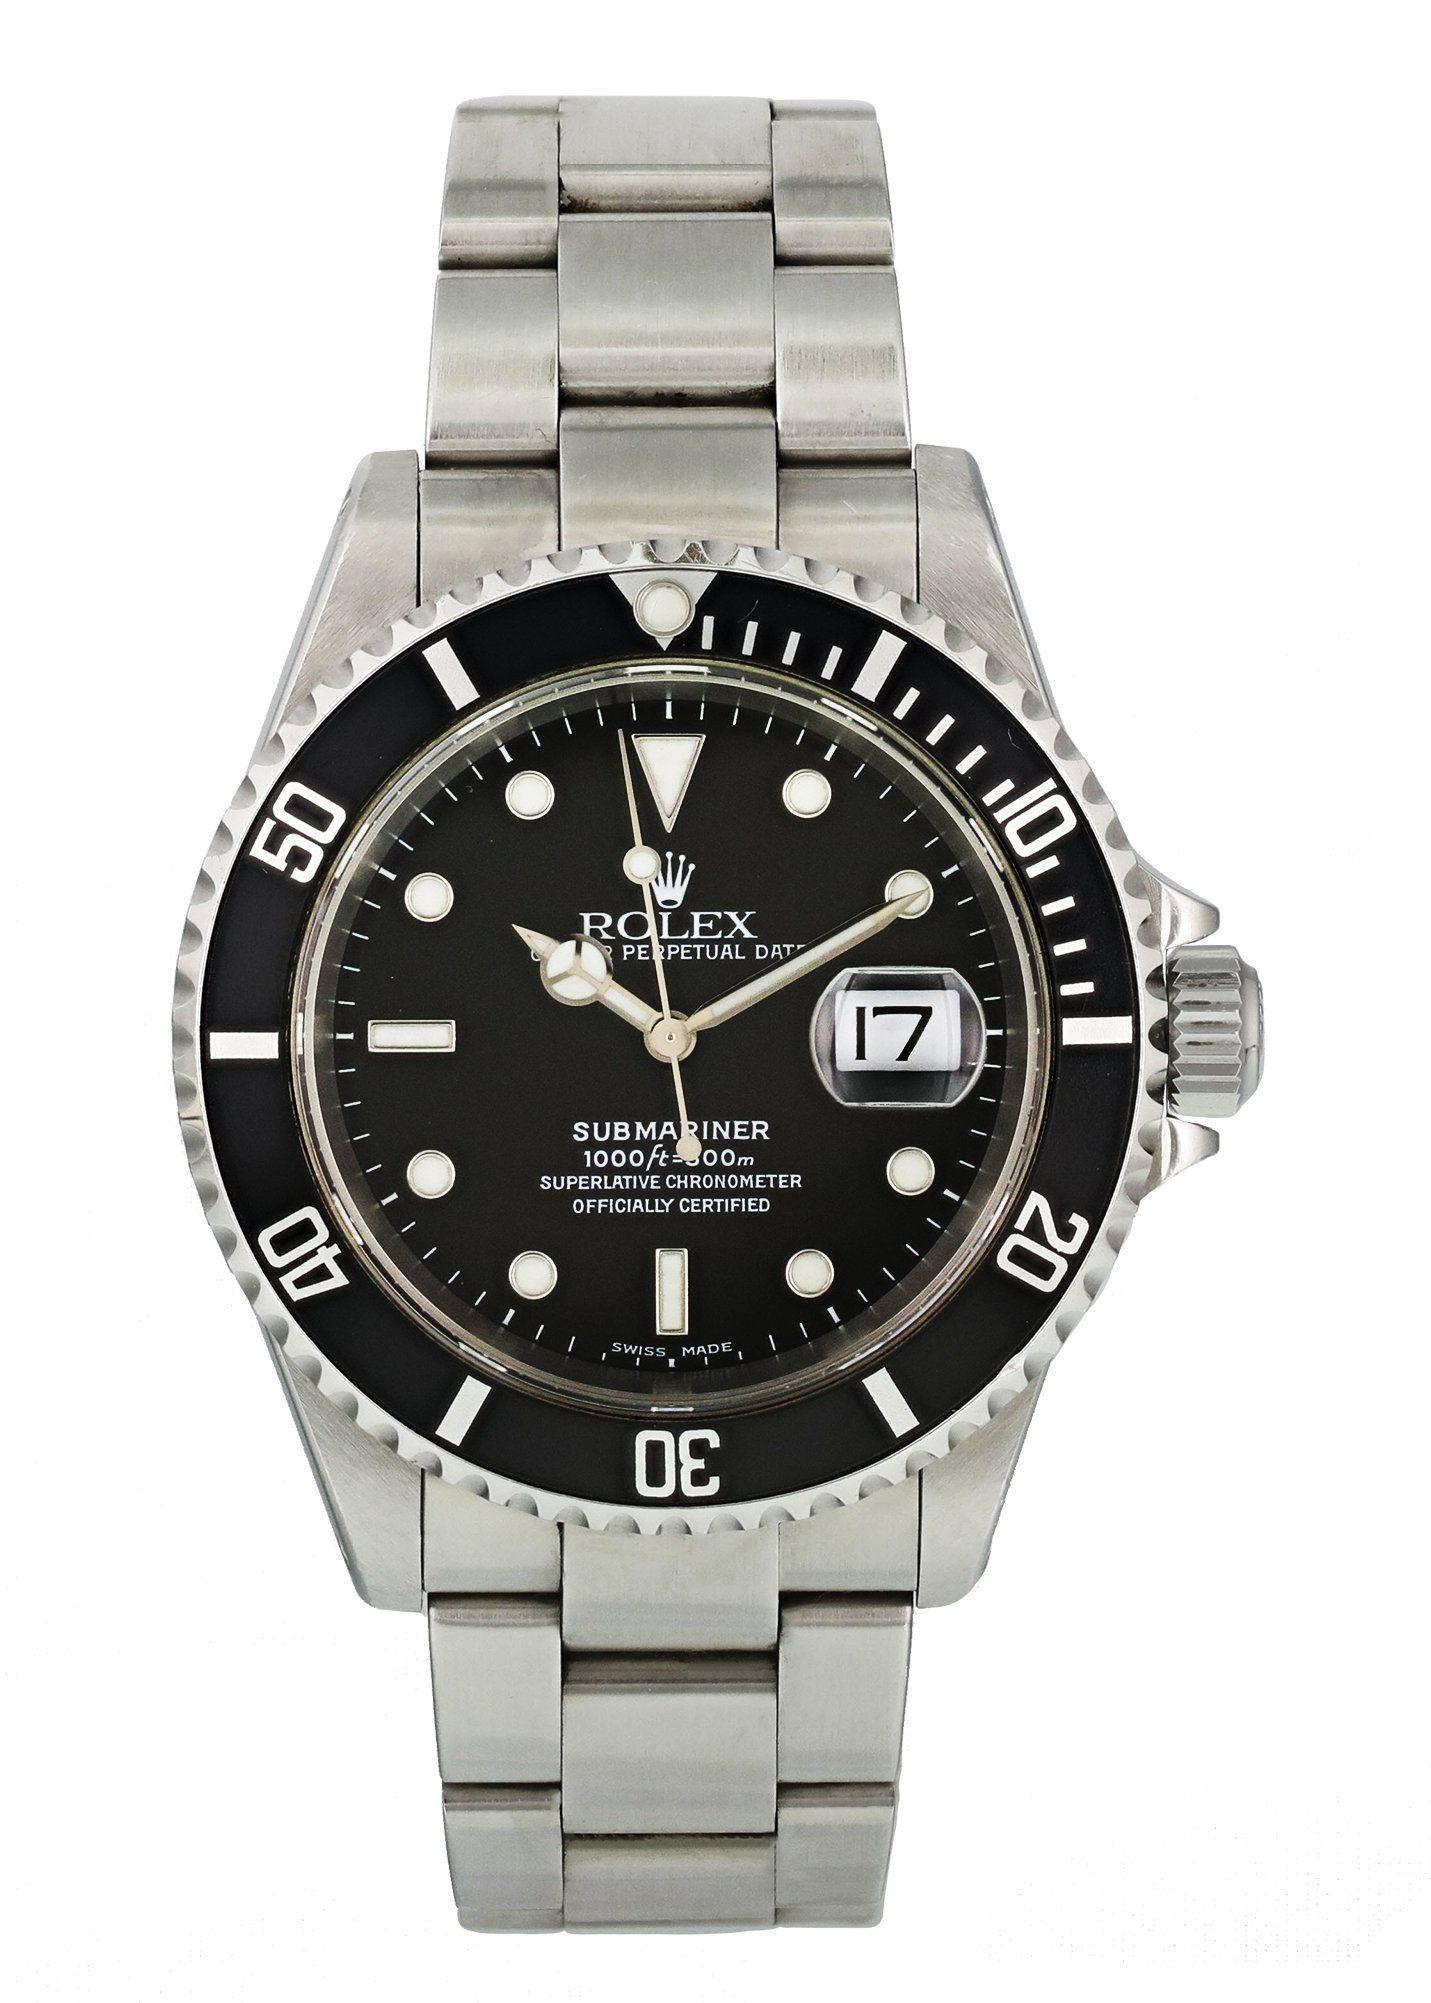 Rolex Submariner 16610 Men Watch. 
40mm Stainless Steel case. 
Stainless Steel Unidirectional bezel. 
Black dial with Luminous Steel hands indexes and dot hour markers. 
Minute markers on the outer dial. 
Date display at the 3 o'clock position.